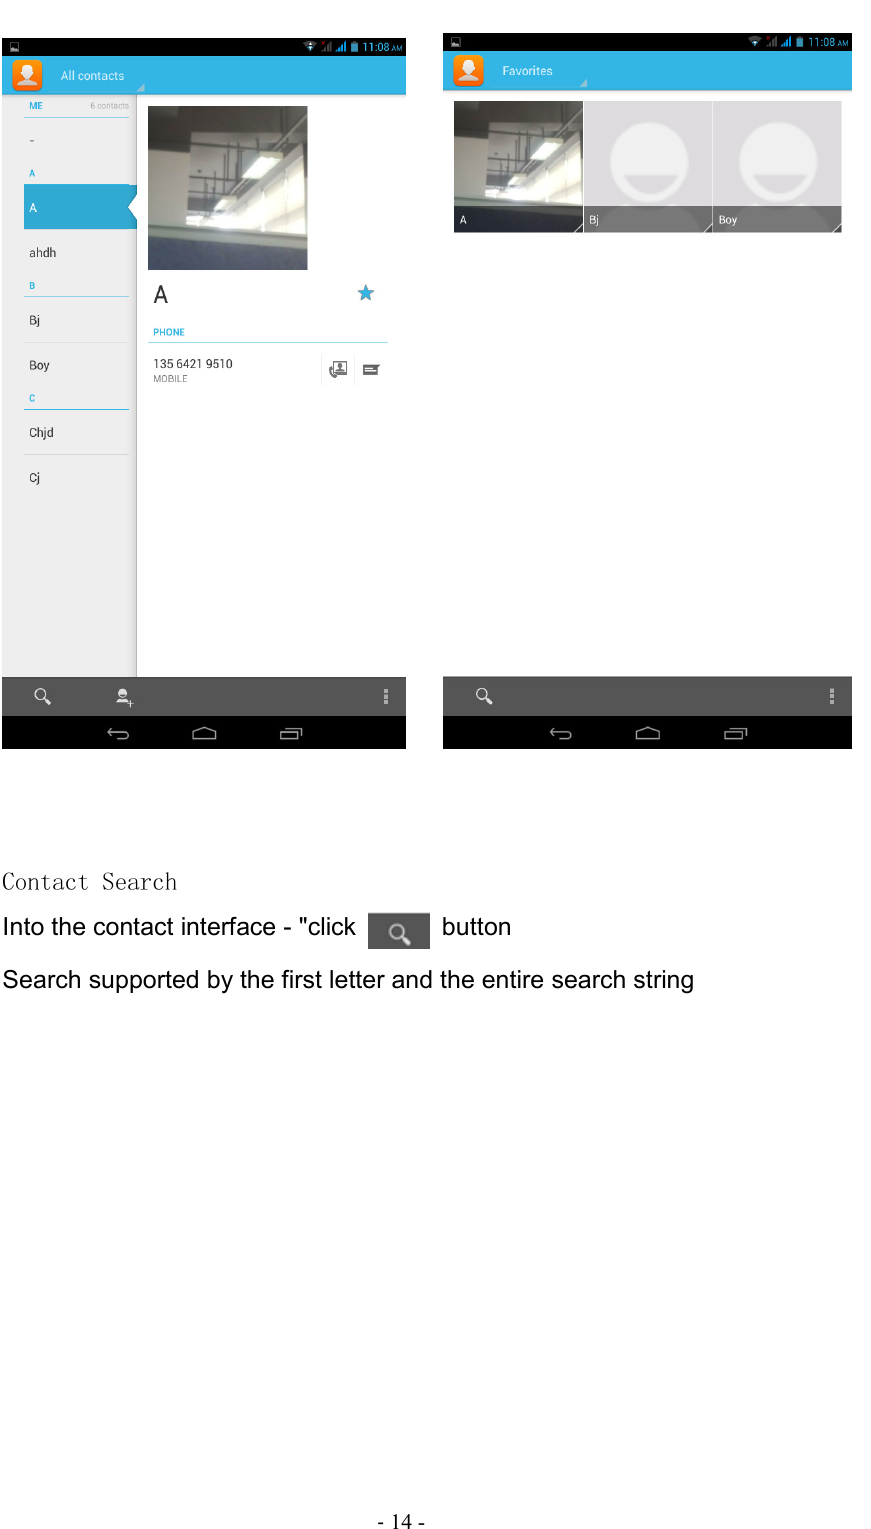                                                                                - 14 -         Contact Search Into the contact interface - &quot;click   button   Search supported by the first letter and the entire search string 